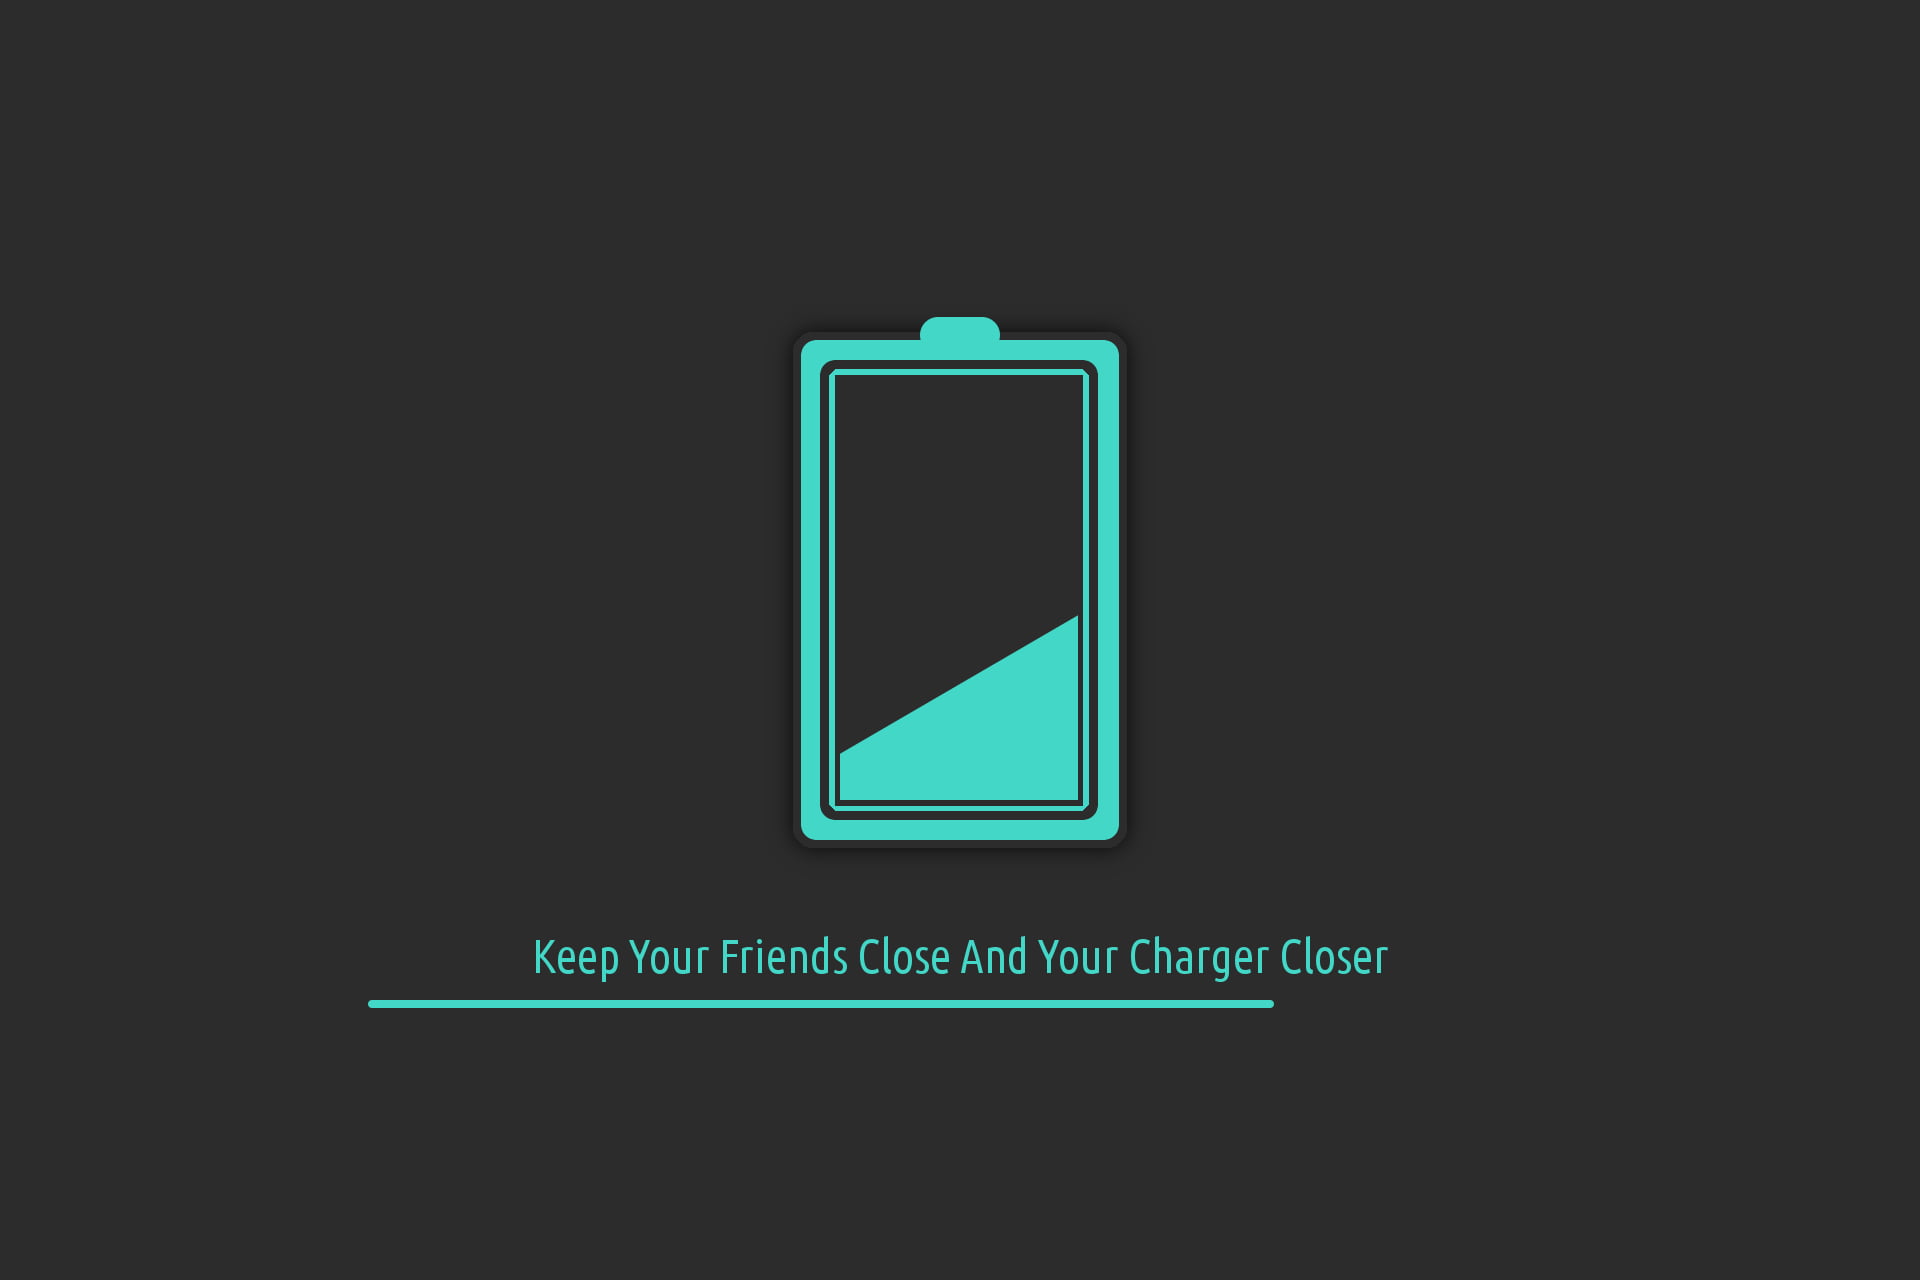 Keep Your Friends Close And Your Charger Closer - HD Wallpaper 